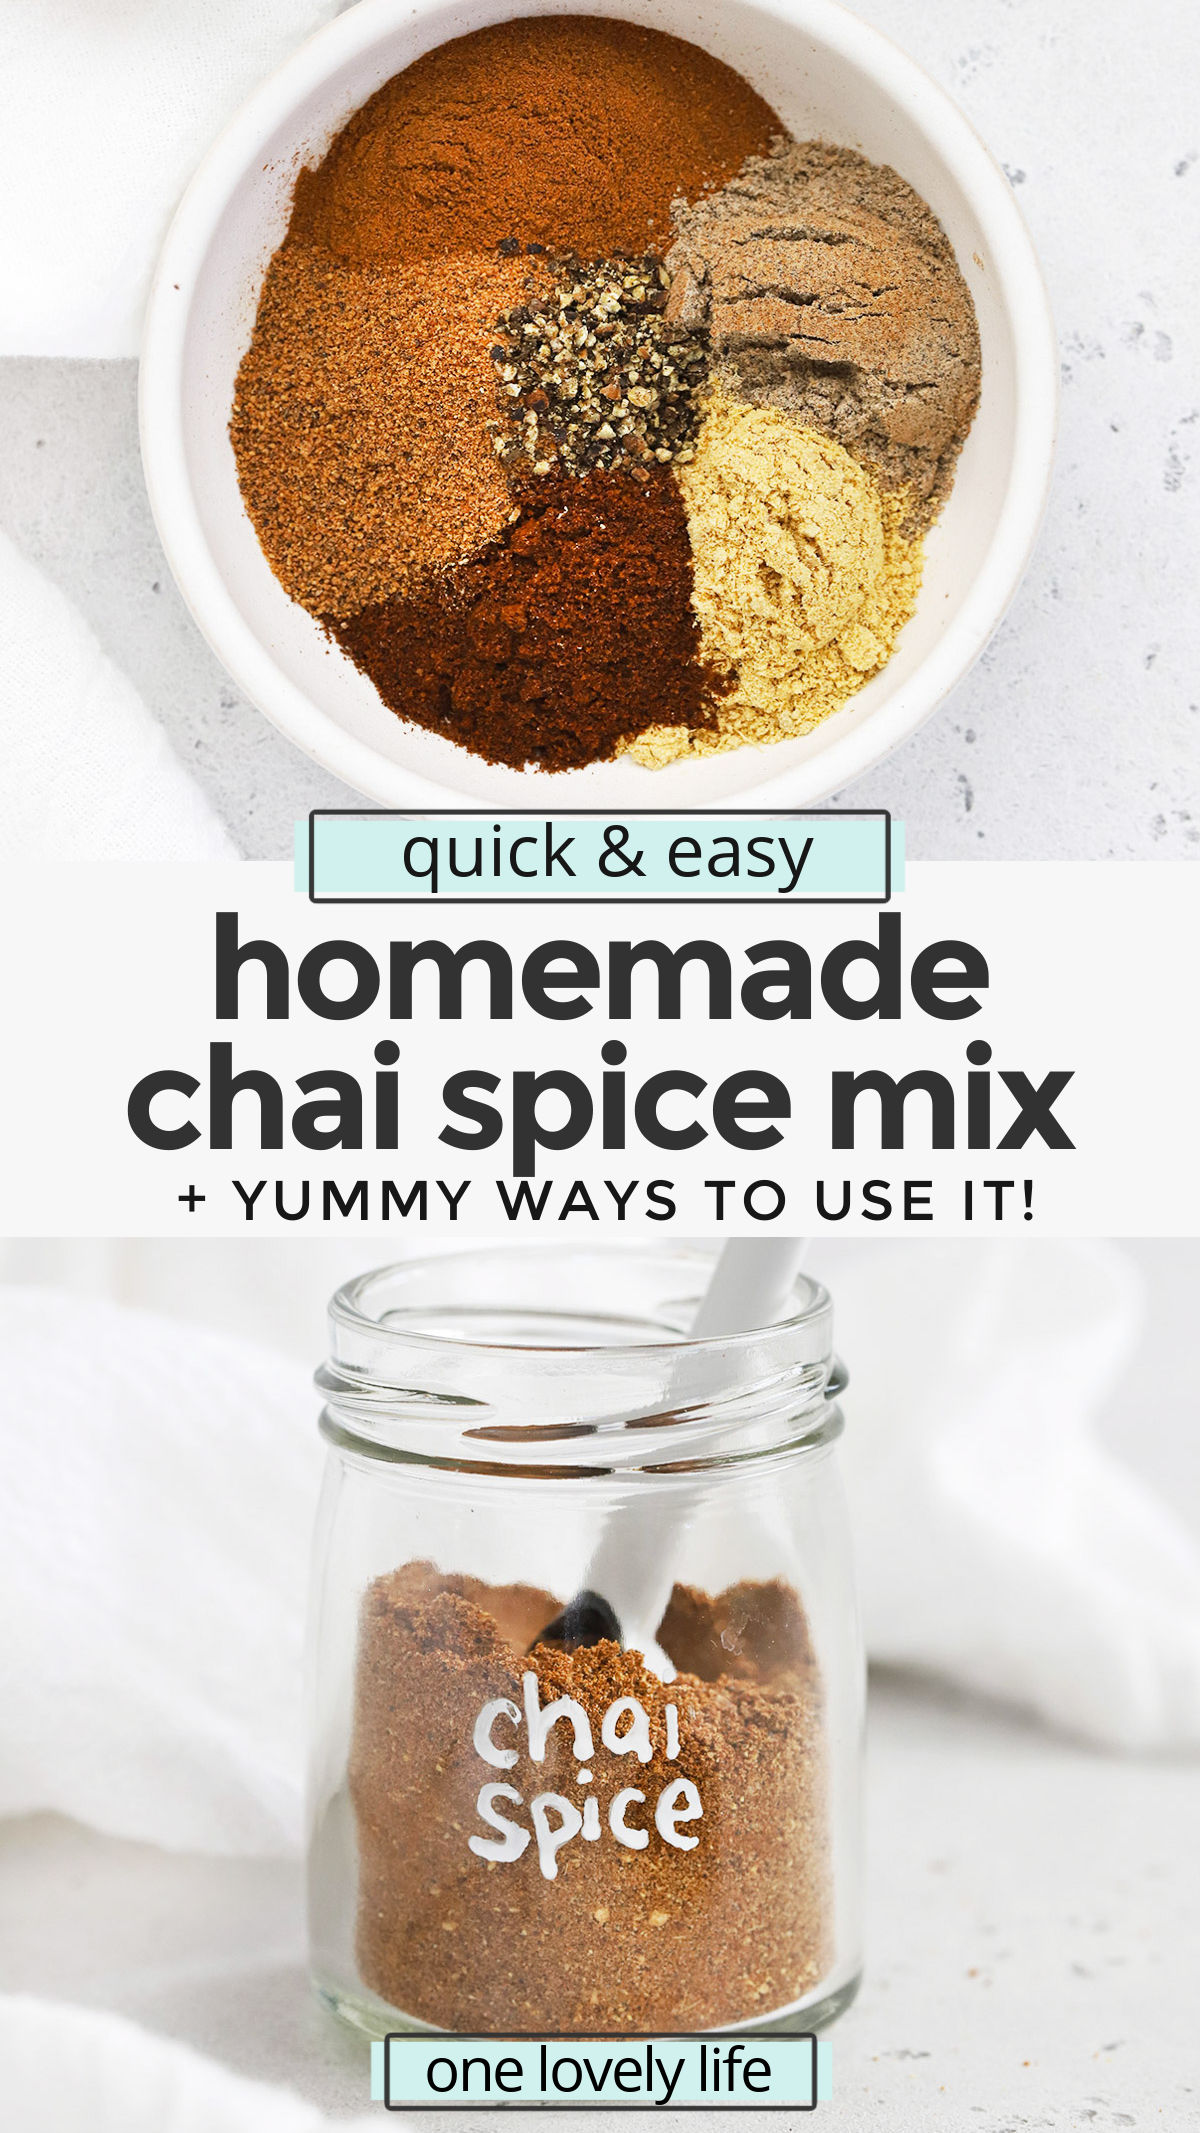 Chai Spice Mix - Learn how to make chai spice mix with our easy recipe! Add it to drinks, baked goods, and so much more. Don't miss all our favorite ways to use it in the post! (Naturally vegan, paleo, Whole30) // DIY Chai Spice // Homemade Chai Mix // Homemade Spice Blend // Chai Spice From Scratch// #chaispice #chai #fromscratch